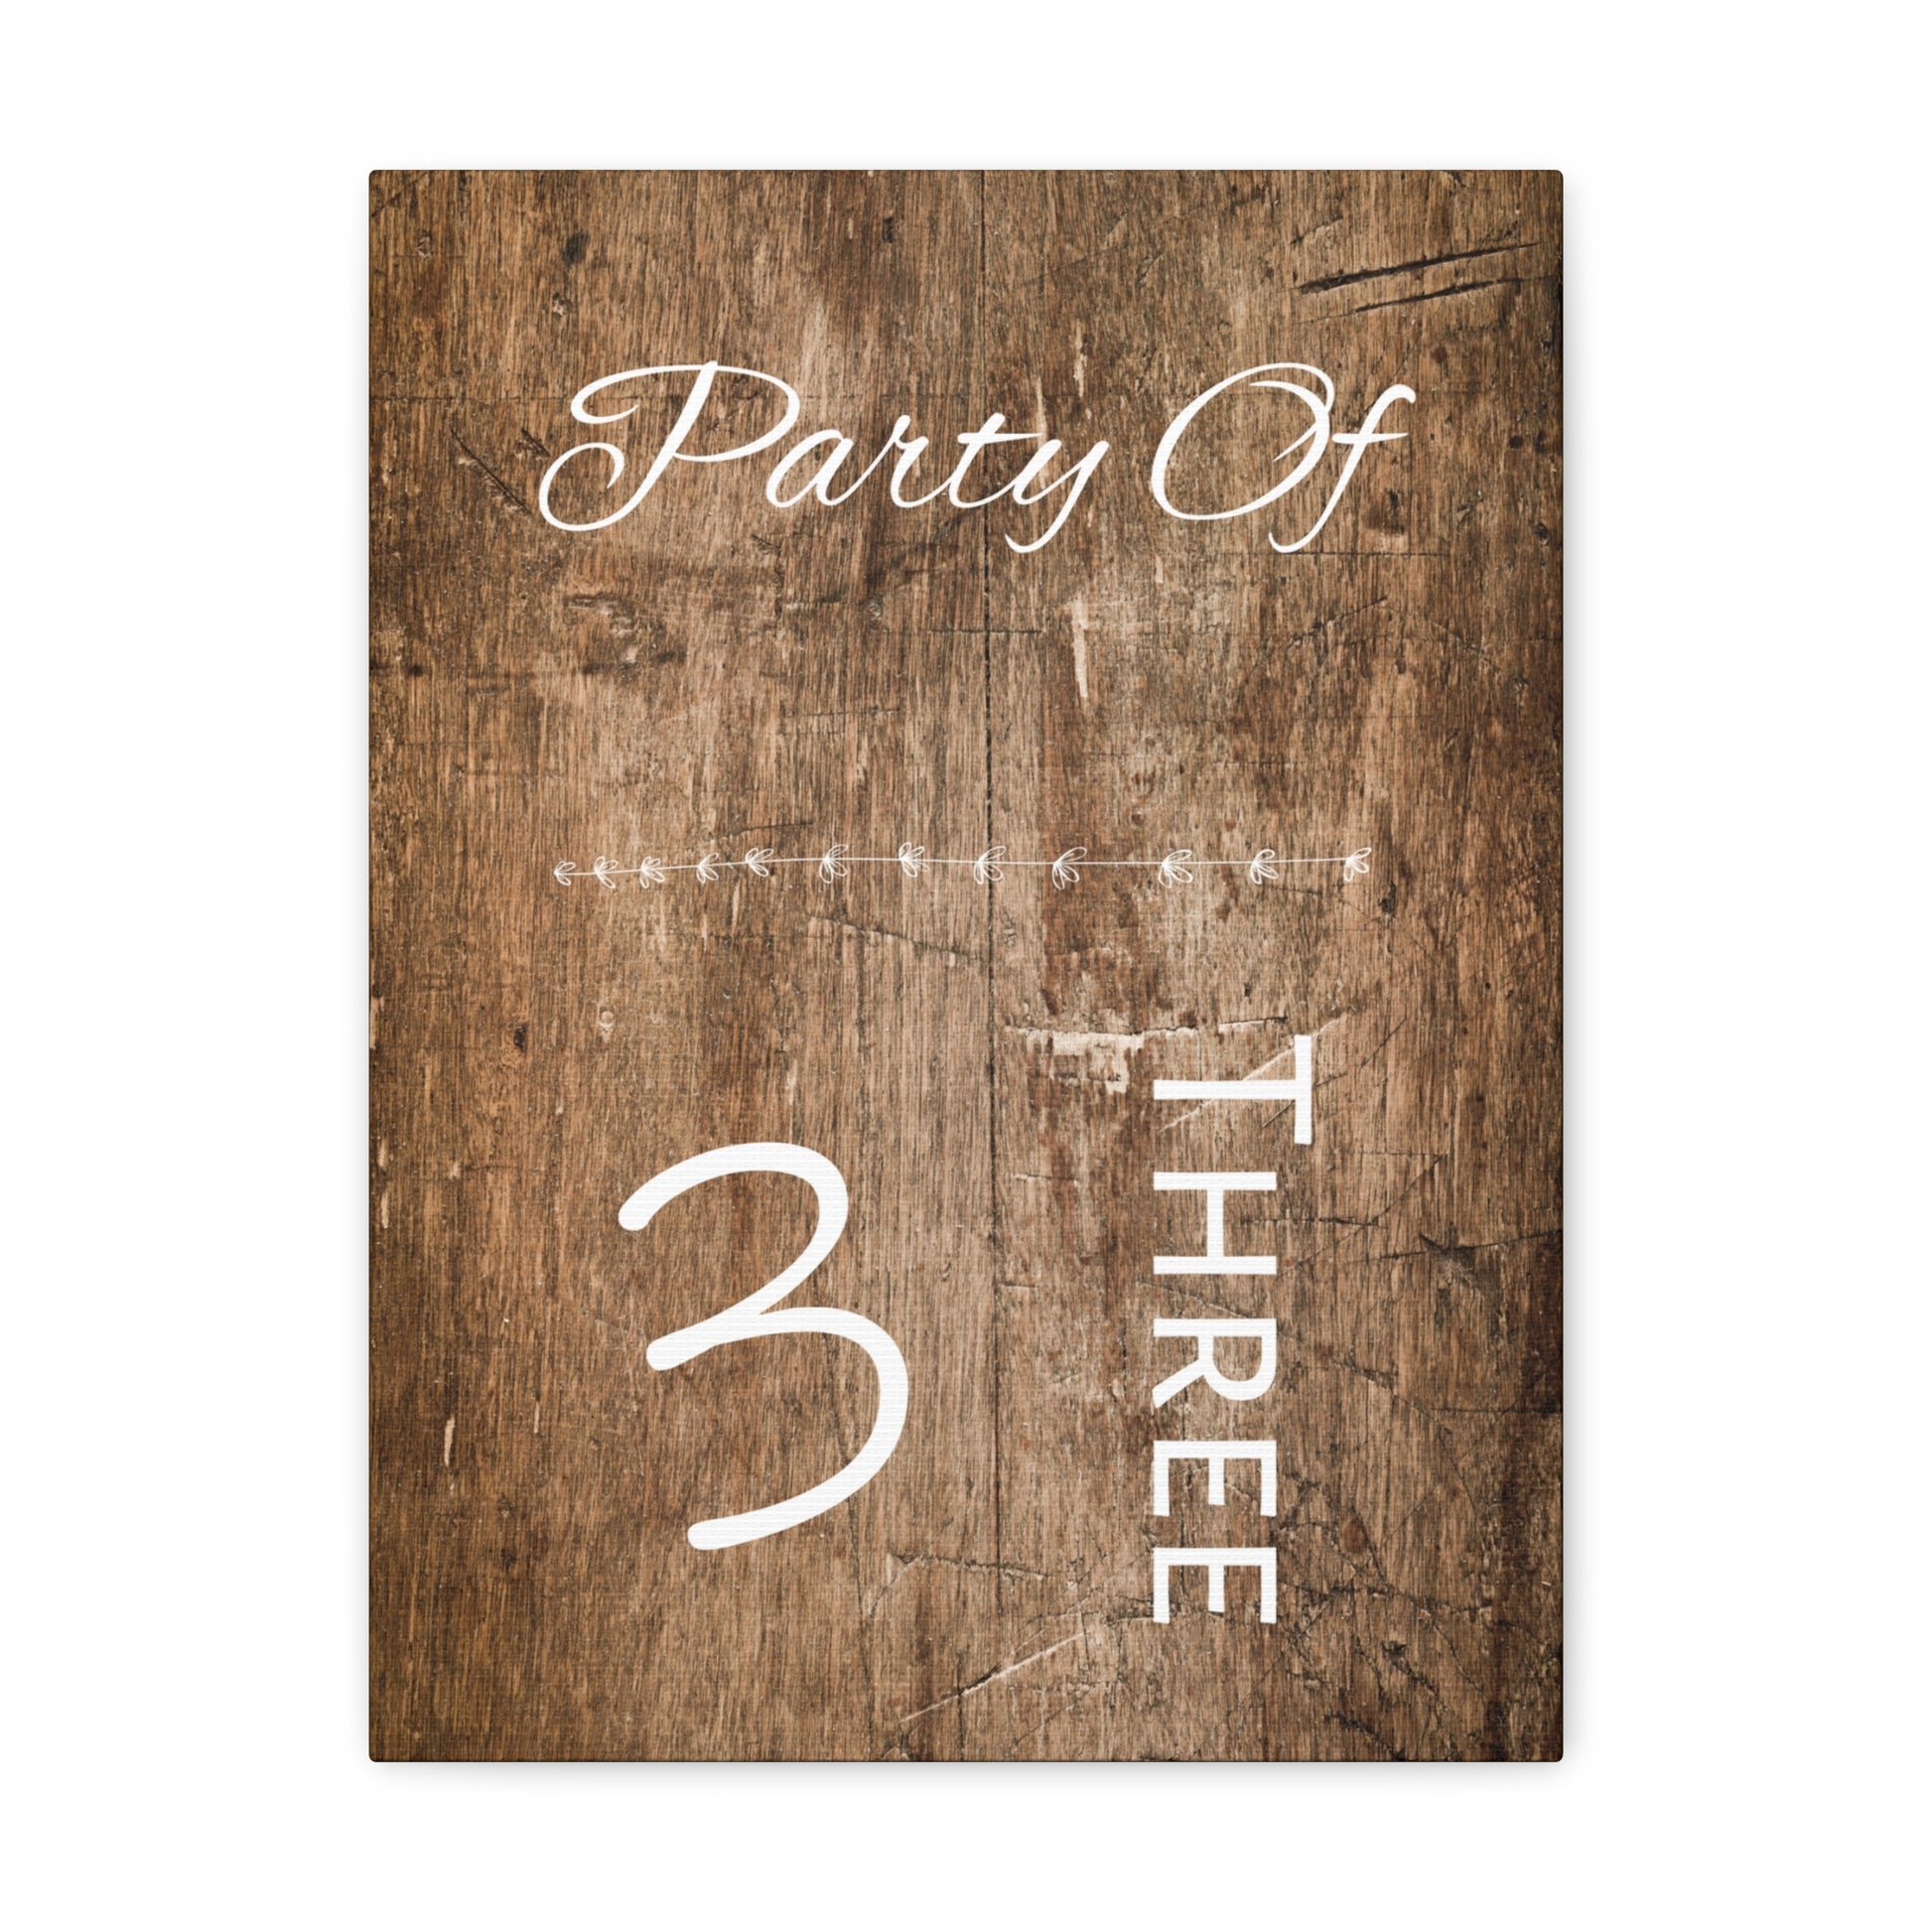 "Party Of 3" Wall Art - Weave Got Gifts - Unique Gifts You Won’t Find Anywhere Else!